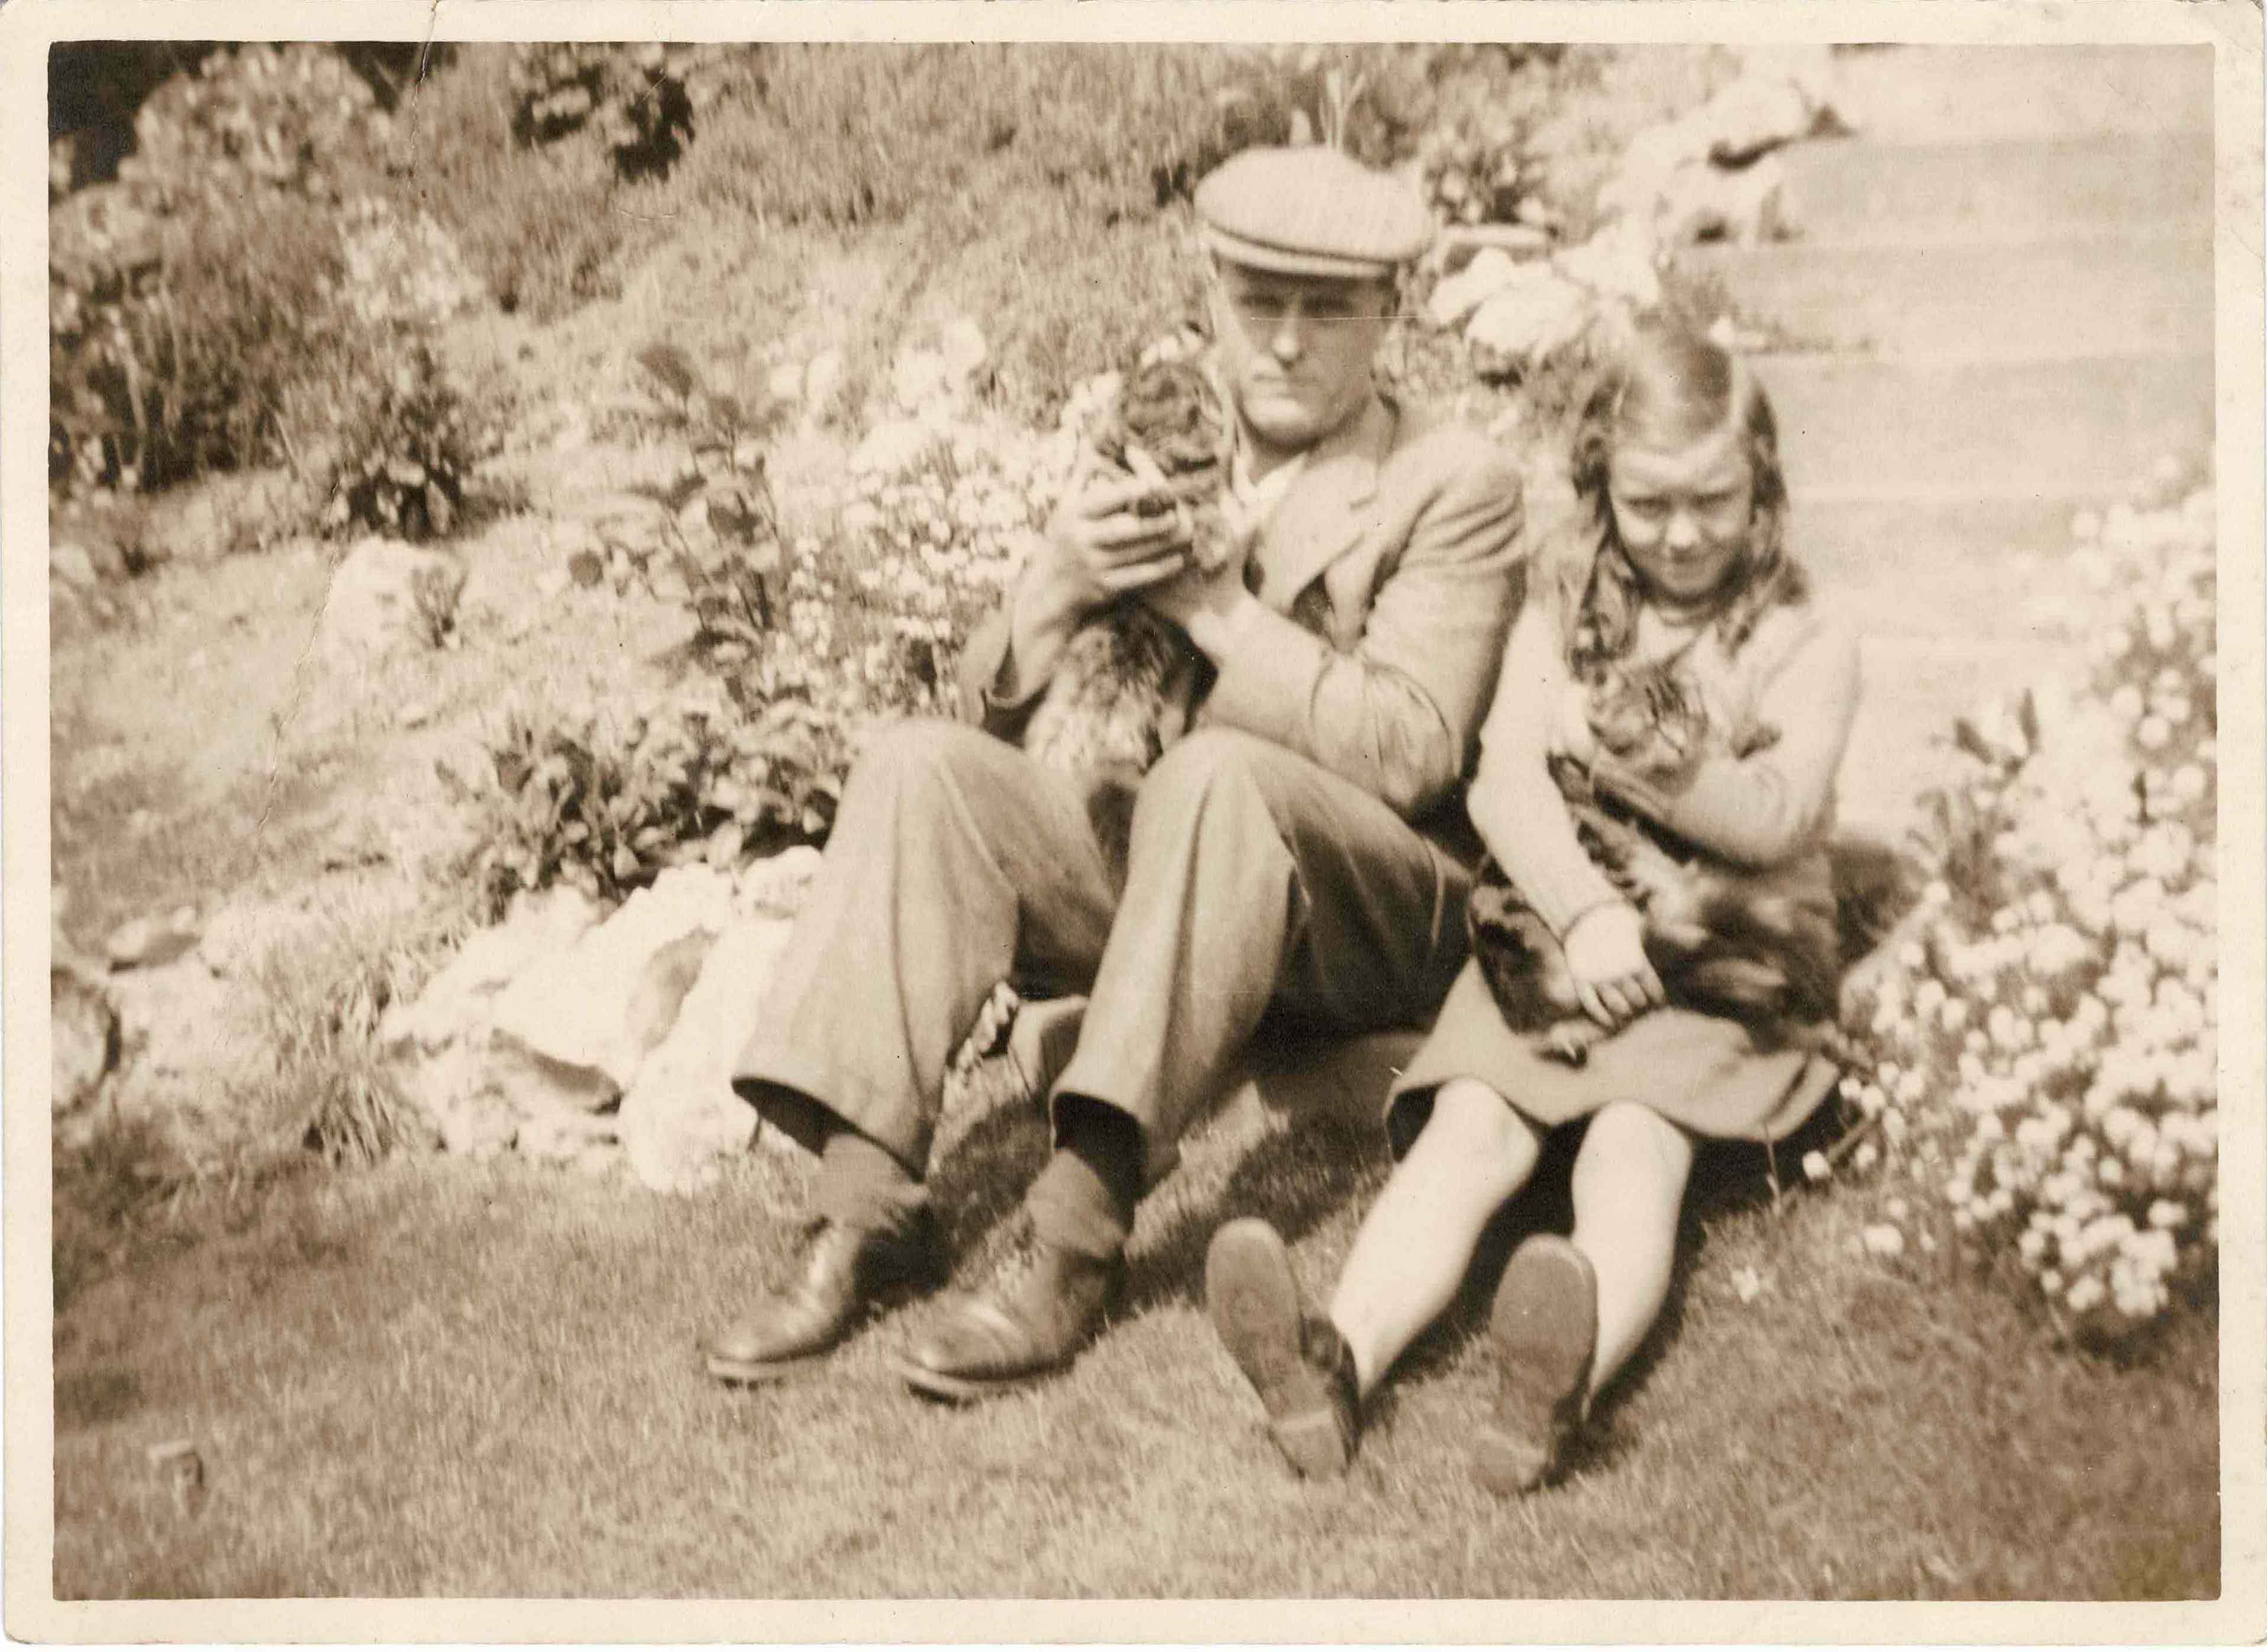 Photograph of Philip and Molly Coombe with cats, c. 1935.